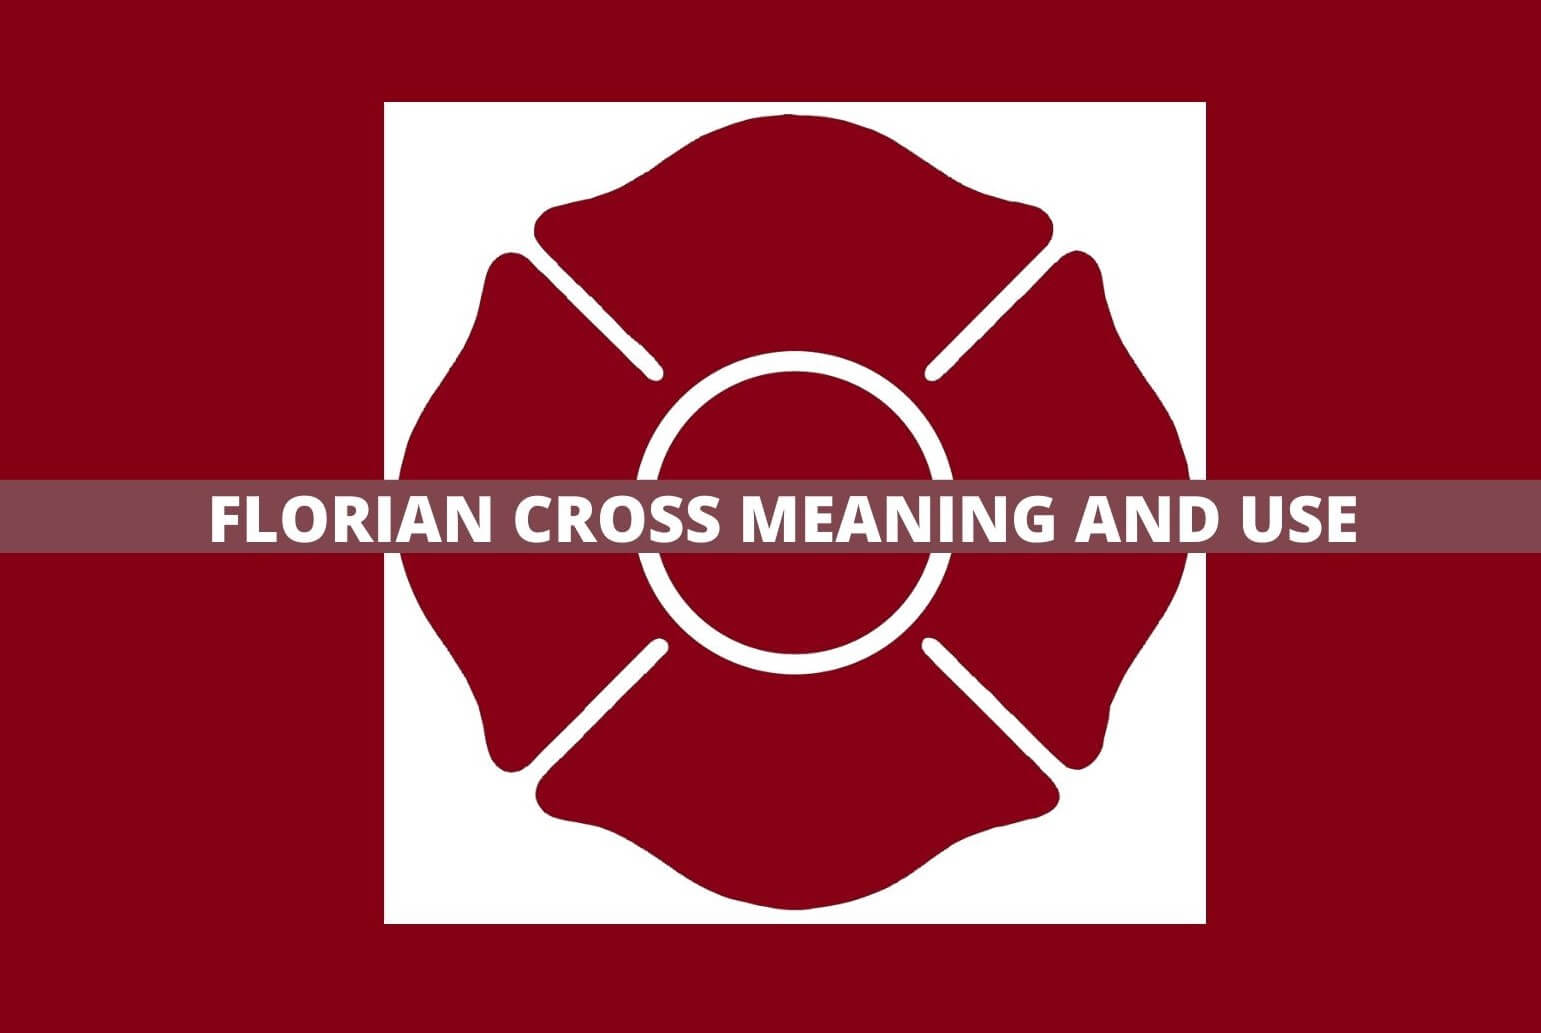 Florian Cross Meaning